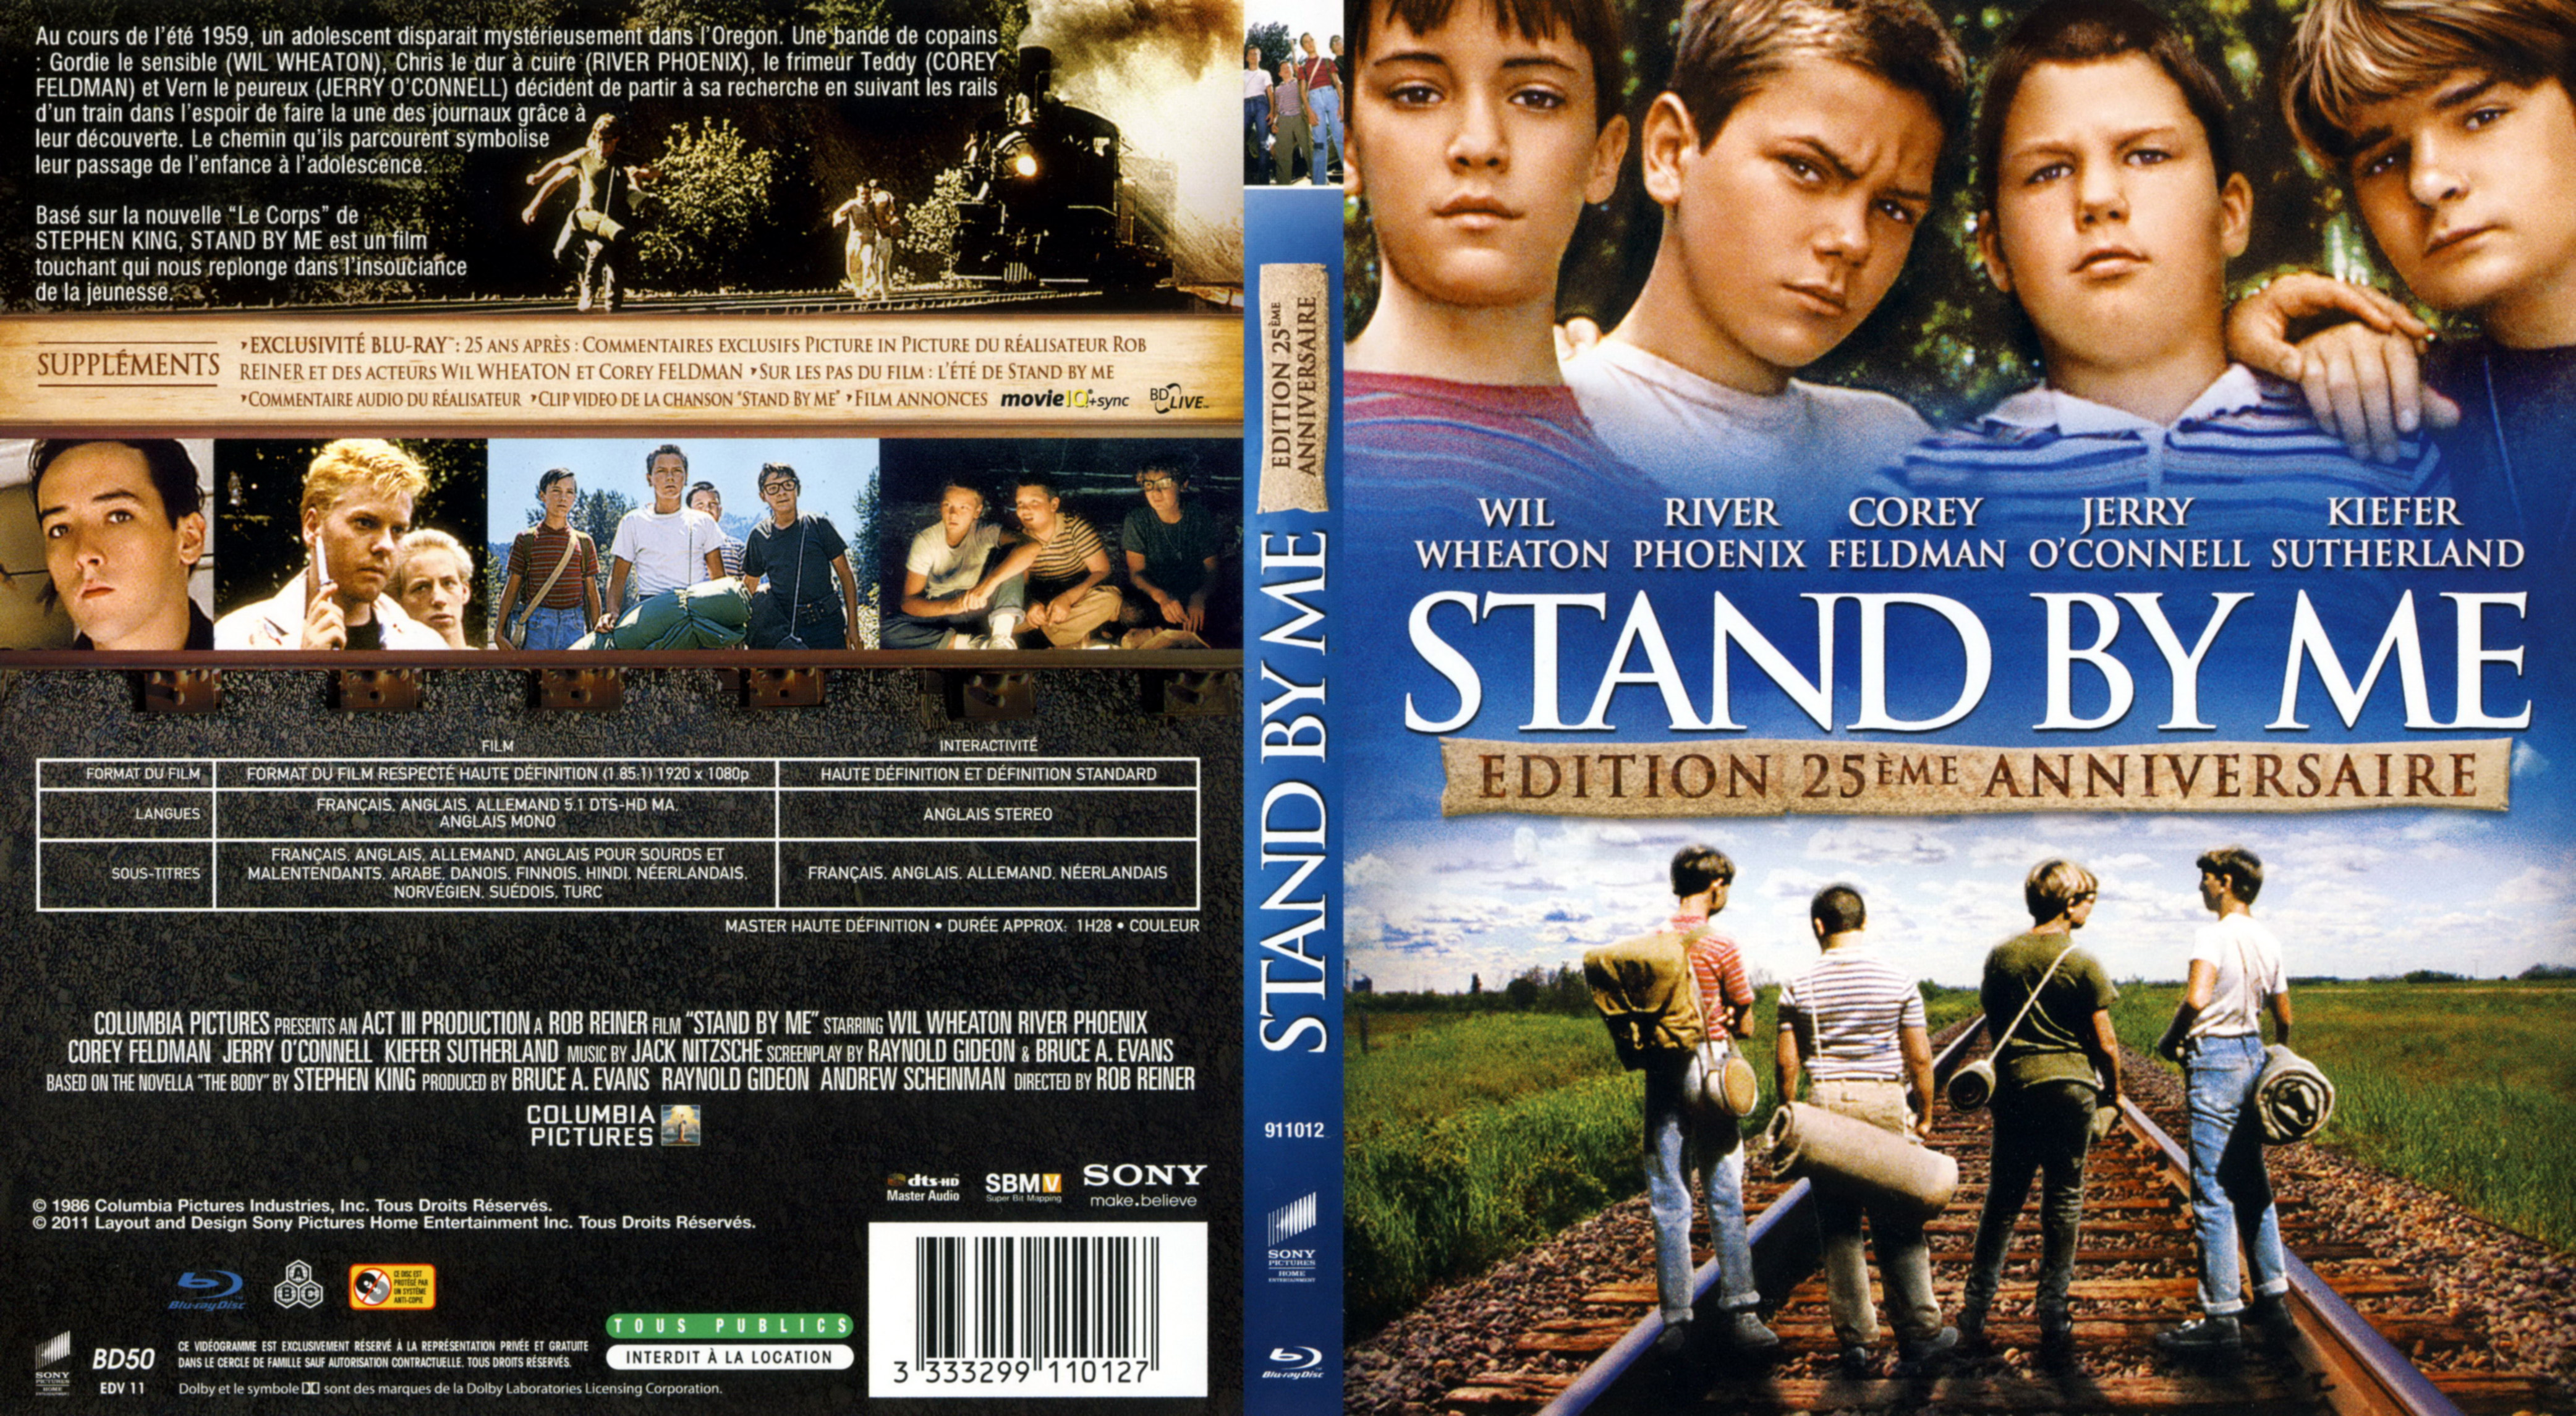 Jaquette DVD Stand by me (BLU-RAY)